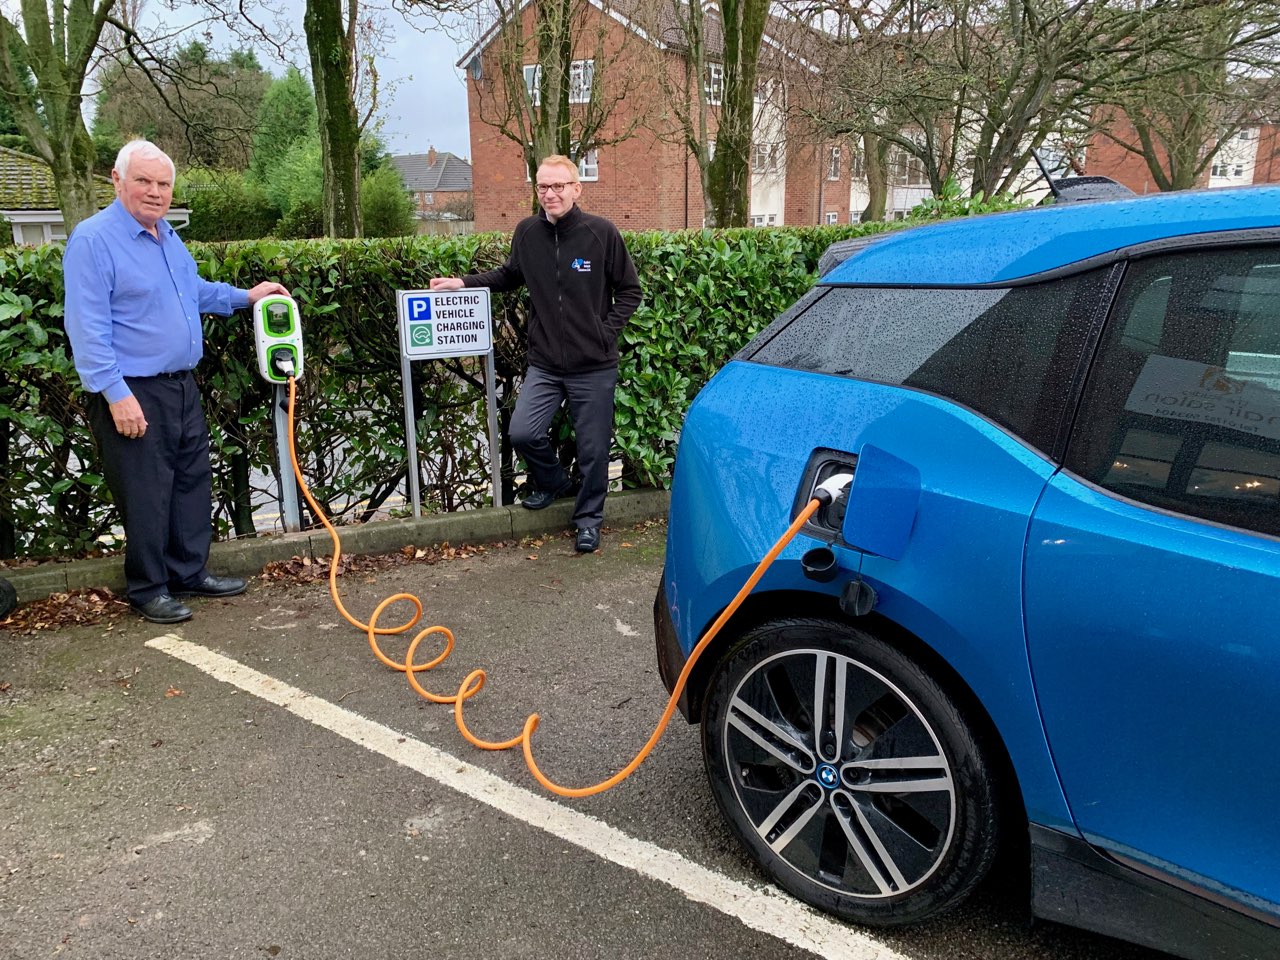 One businessman who is getting fully charged up for the future is Geoff Oldfield, left, owner of the Tollgate Hotel & Leisure in Stoke-on-Trent, North Staffordshire, pictured with Tim Butler of Butler’s Vehicle Solutions.